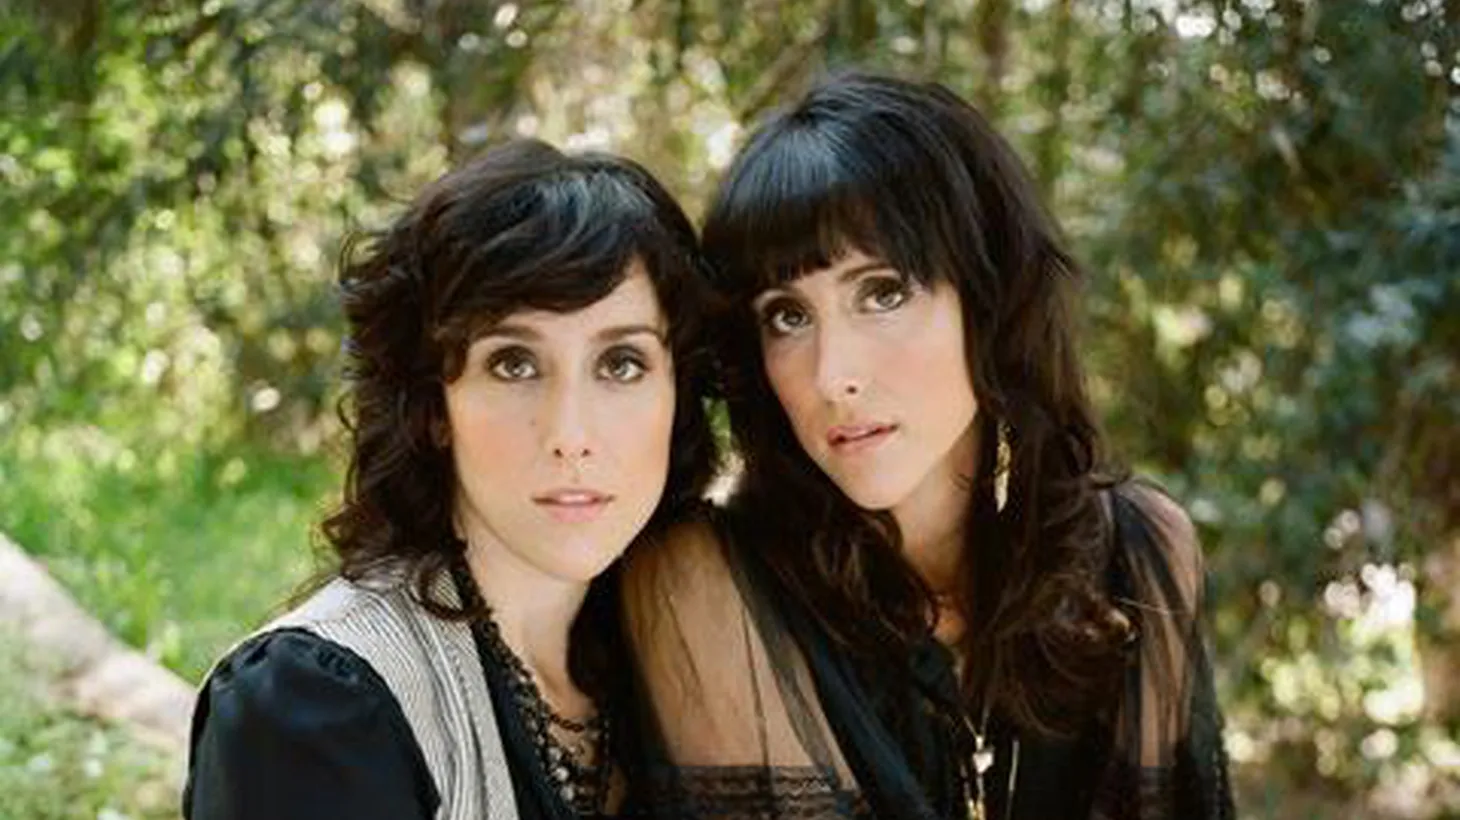 The Watson Twins adopted a grittier soul sound for their new album. We'll get a taste of their pristine harmonies when they perform on Morning Becomes Eclectic at 11:15am.